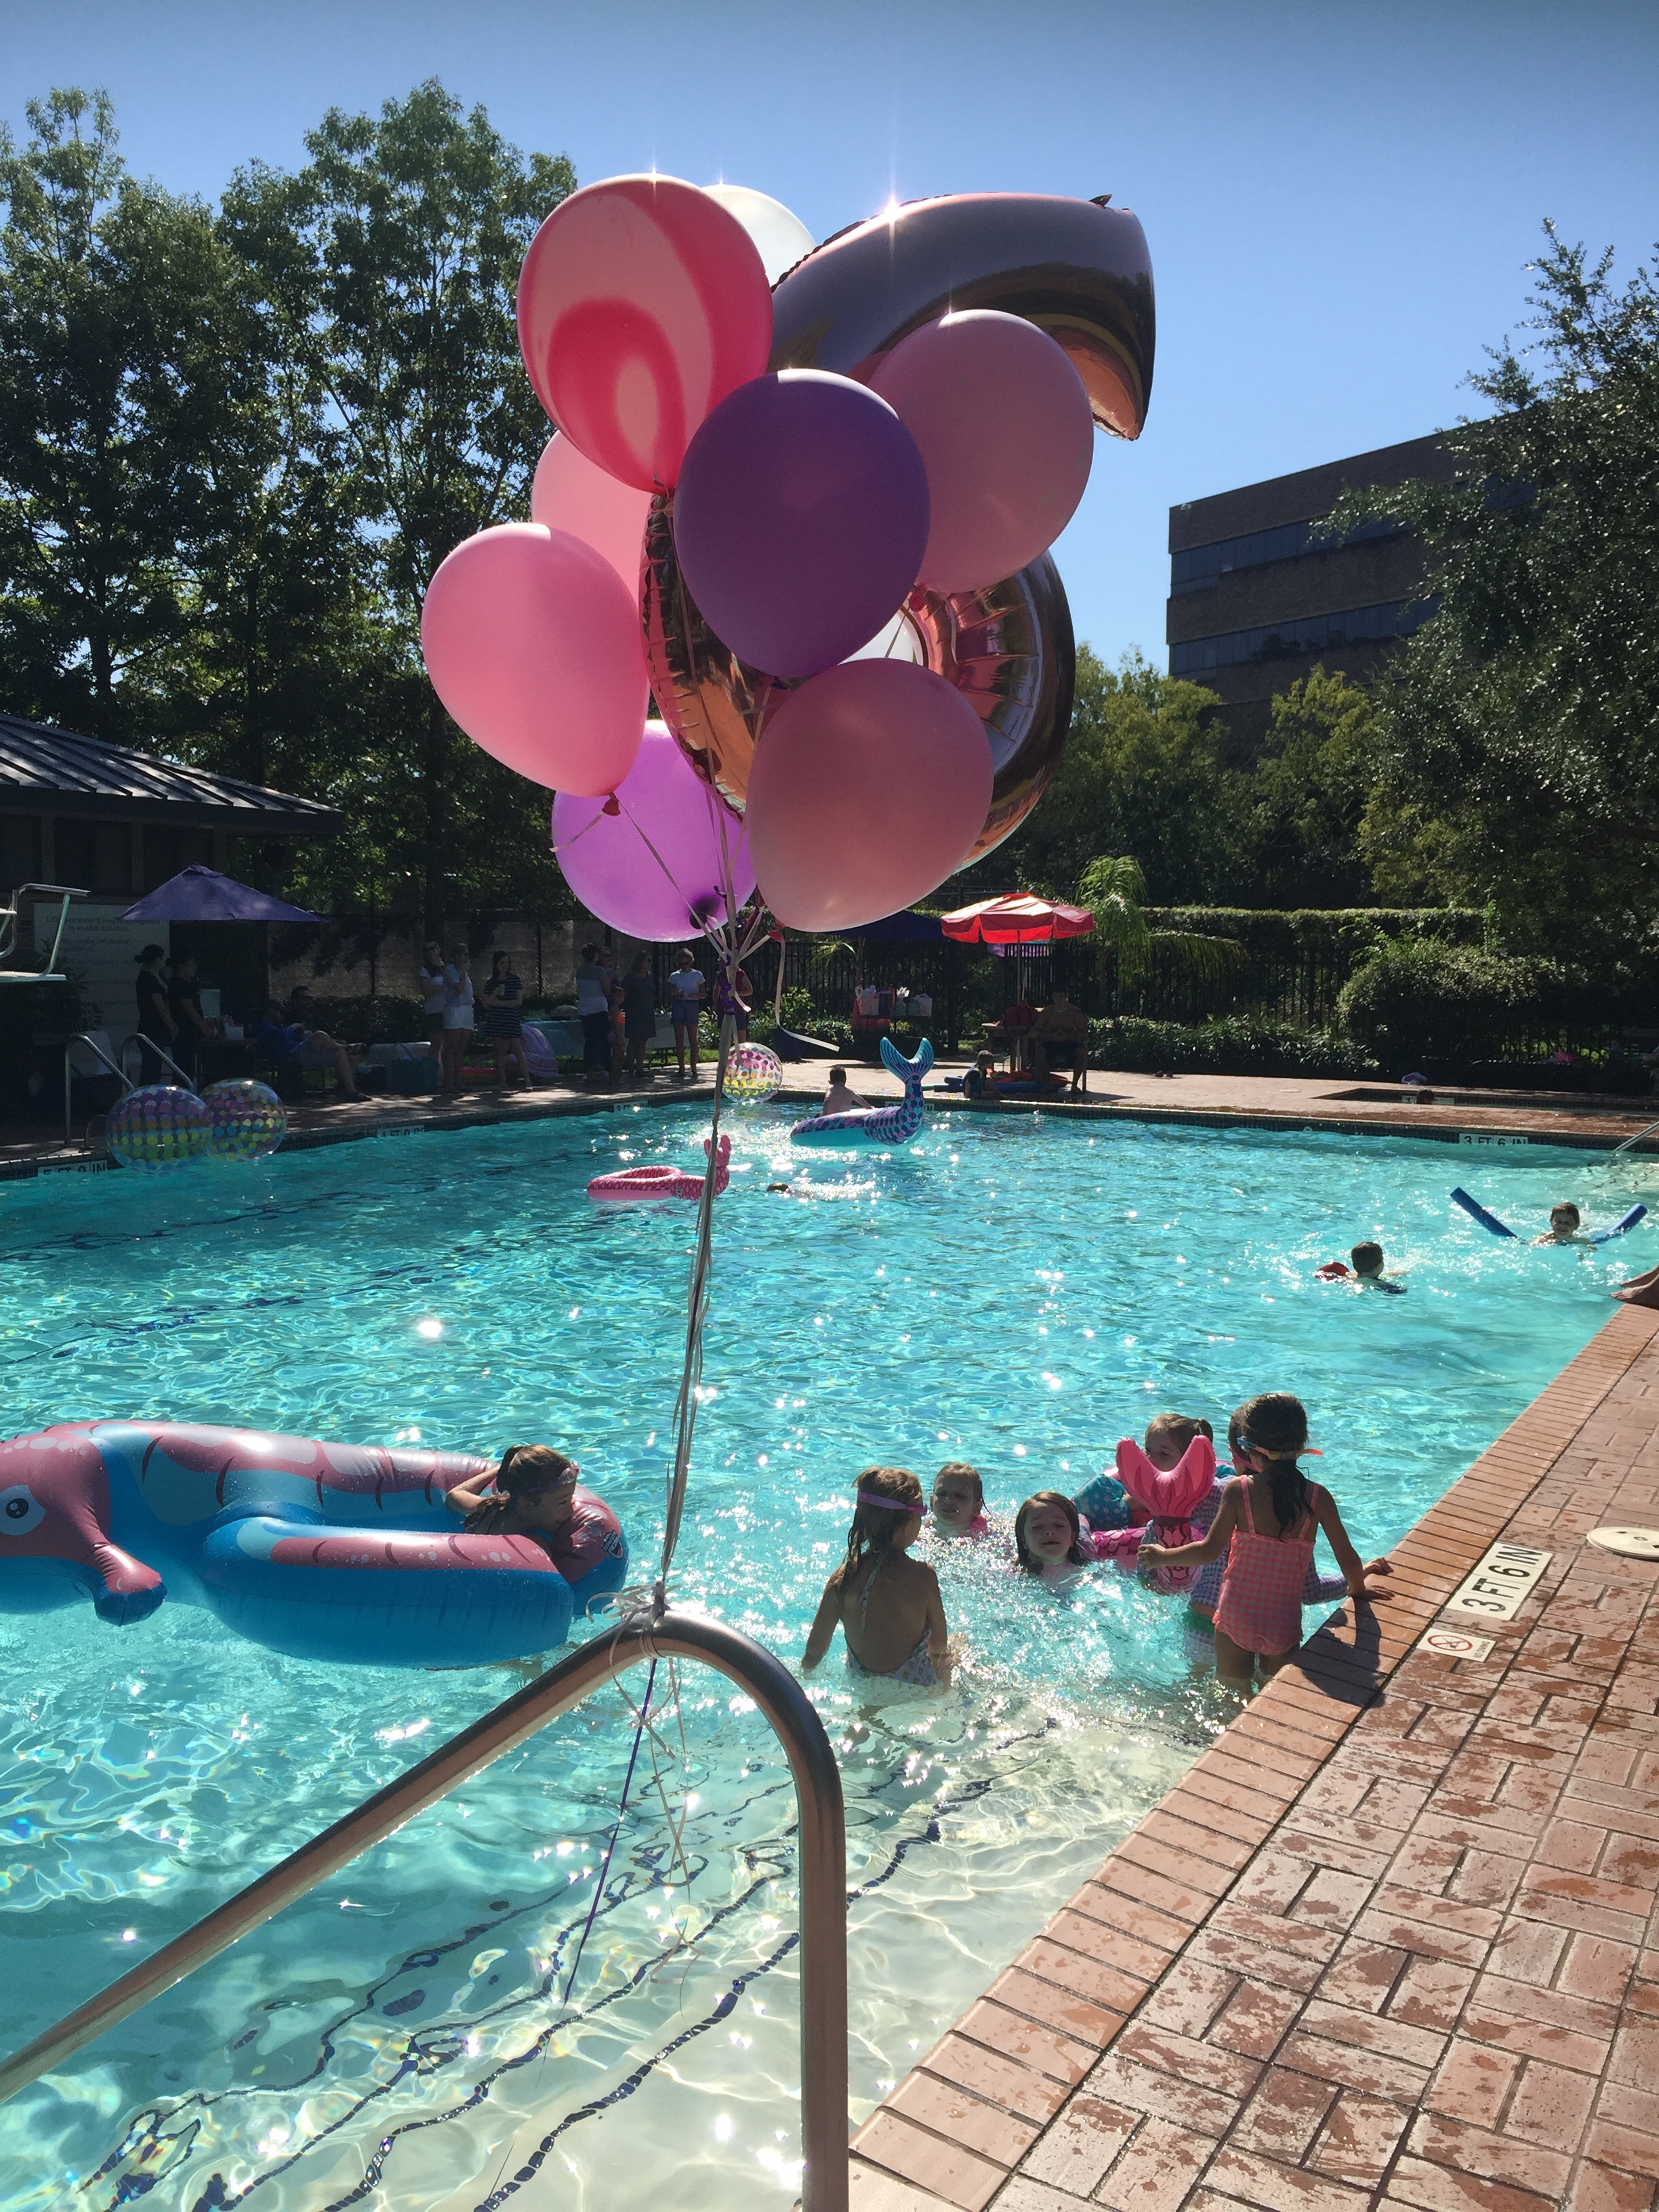 Rent a Pool for a Party or Event | Plunge San Diego